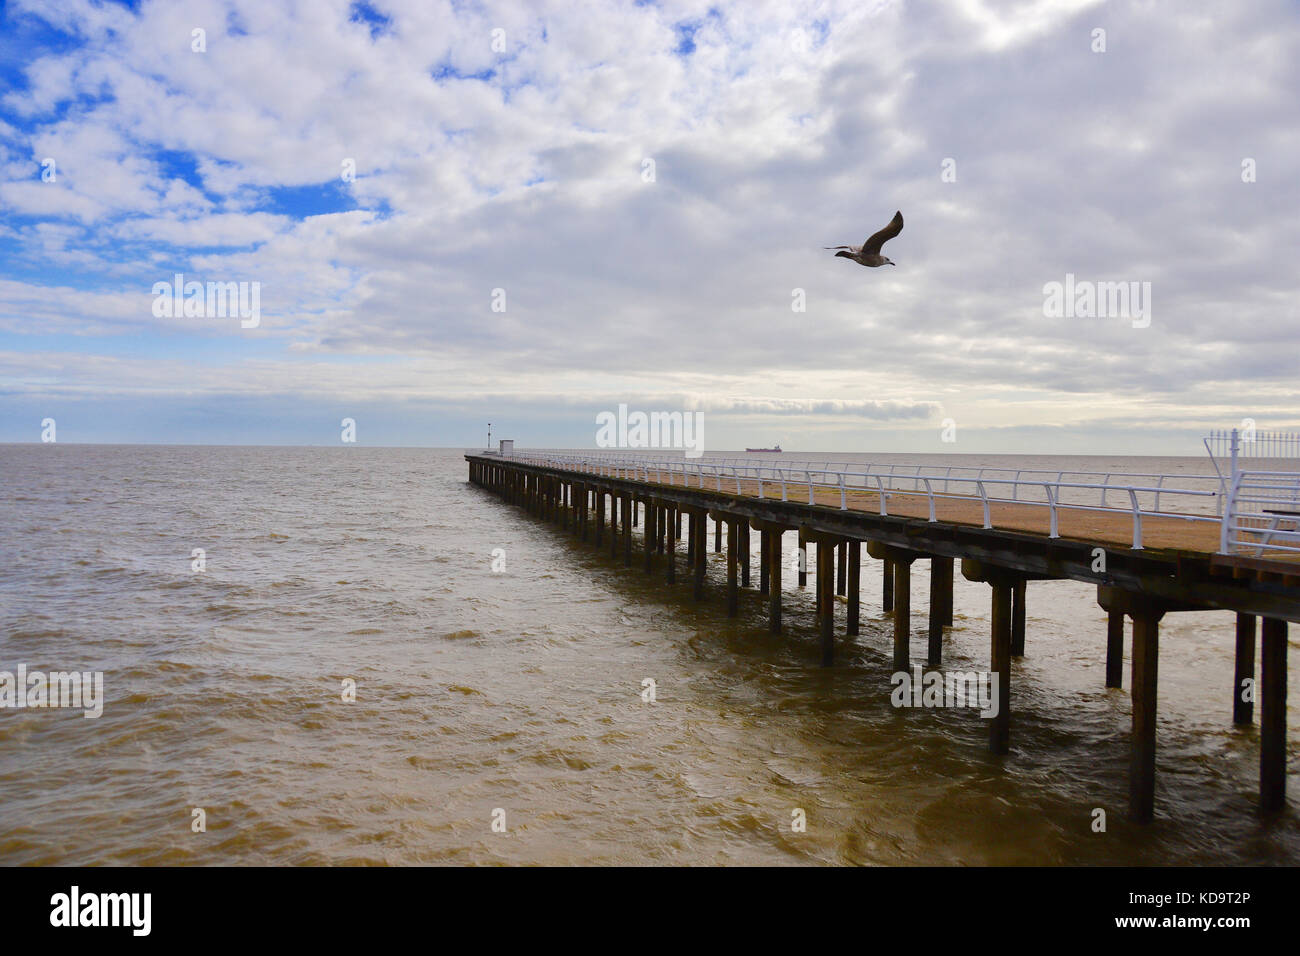 Felixstowe, Suffolk, UK. 11th Oct, 2017. UK Weather: Cloudy skies and seabirds over the pier on a breezy October aftenoon. Felixstowe, Suffolk. Credit: Angela Chalmers/Alamy Live News Stock Photo